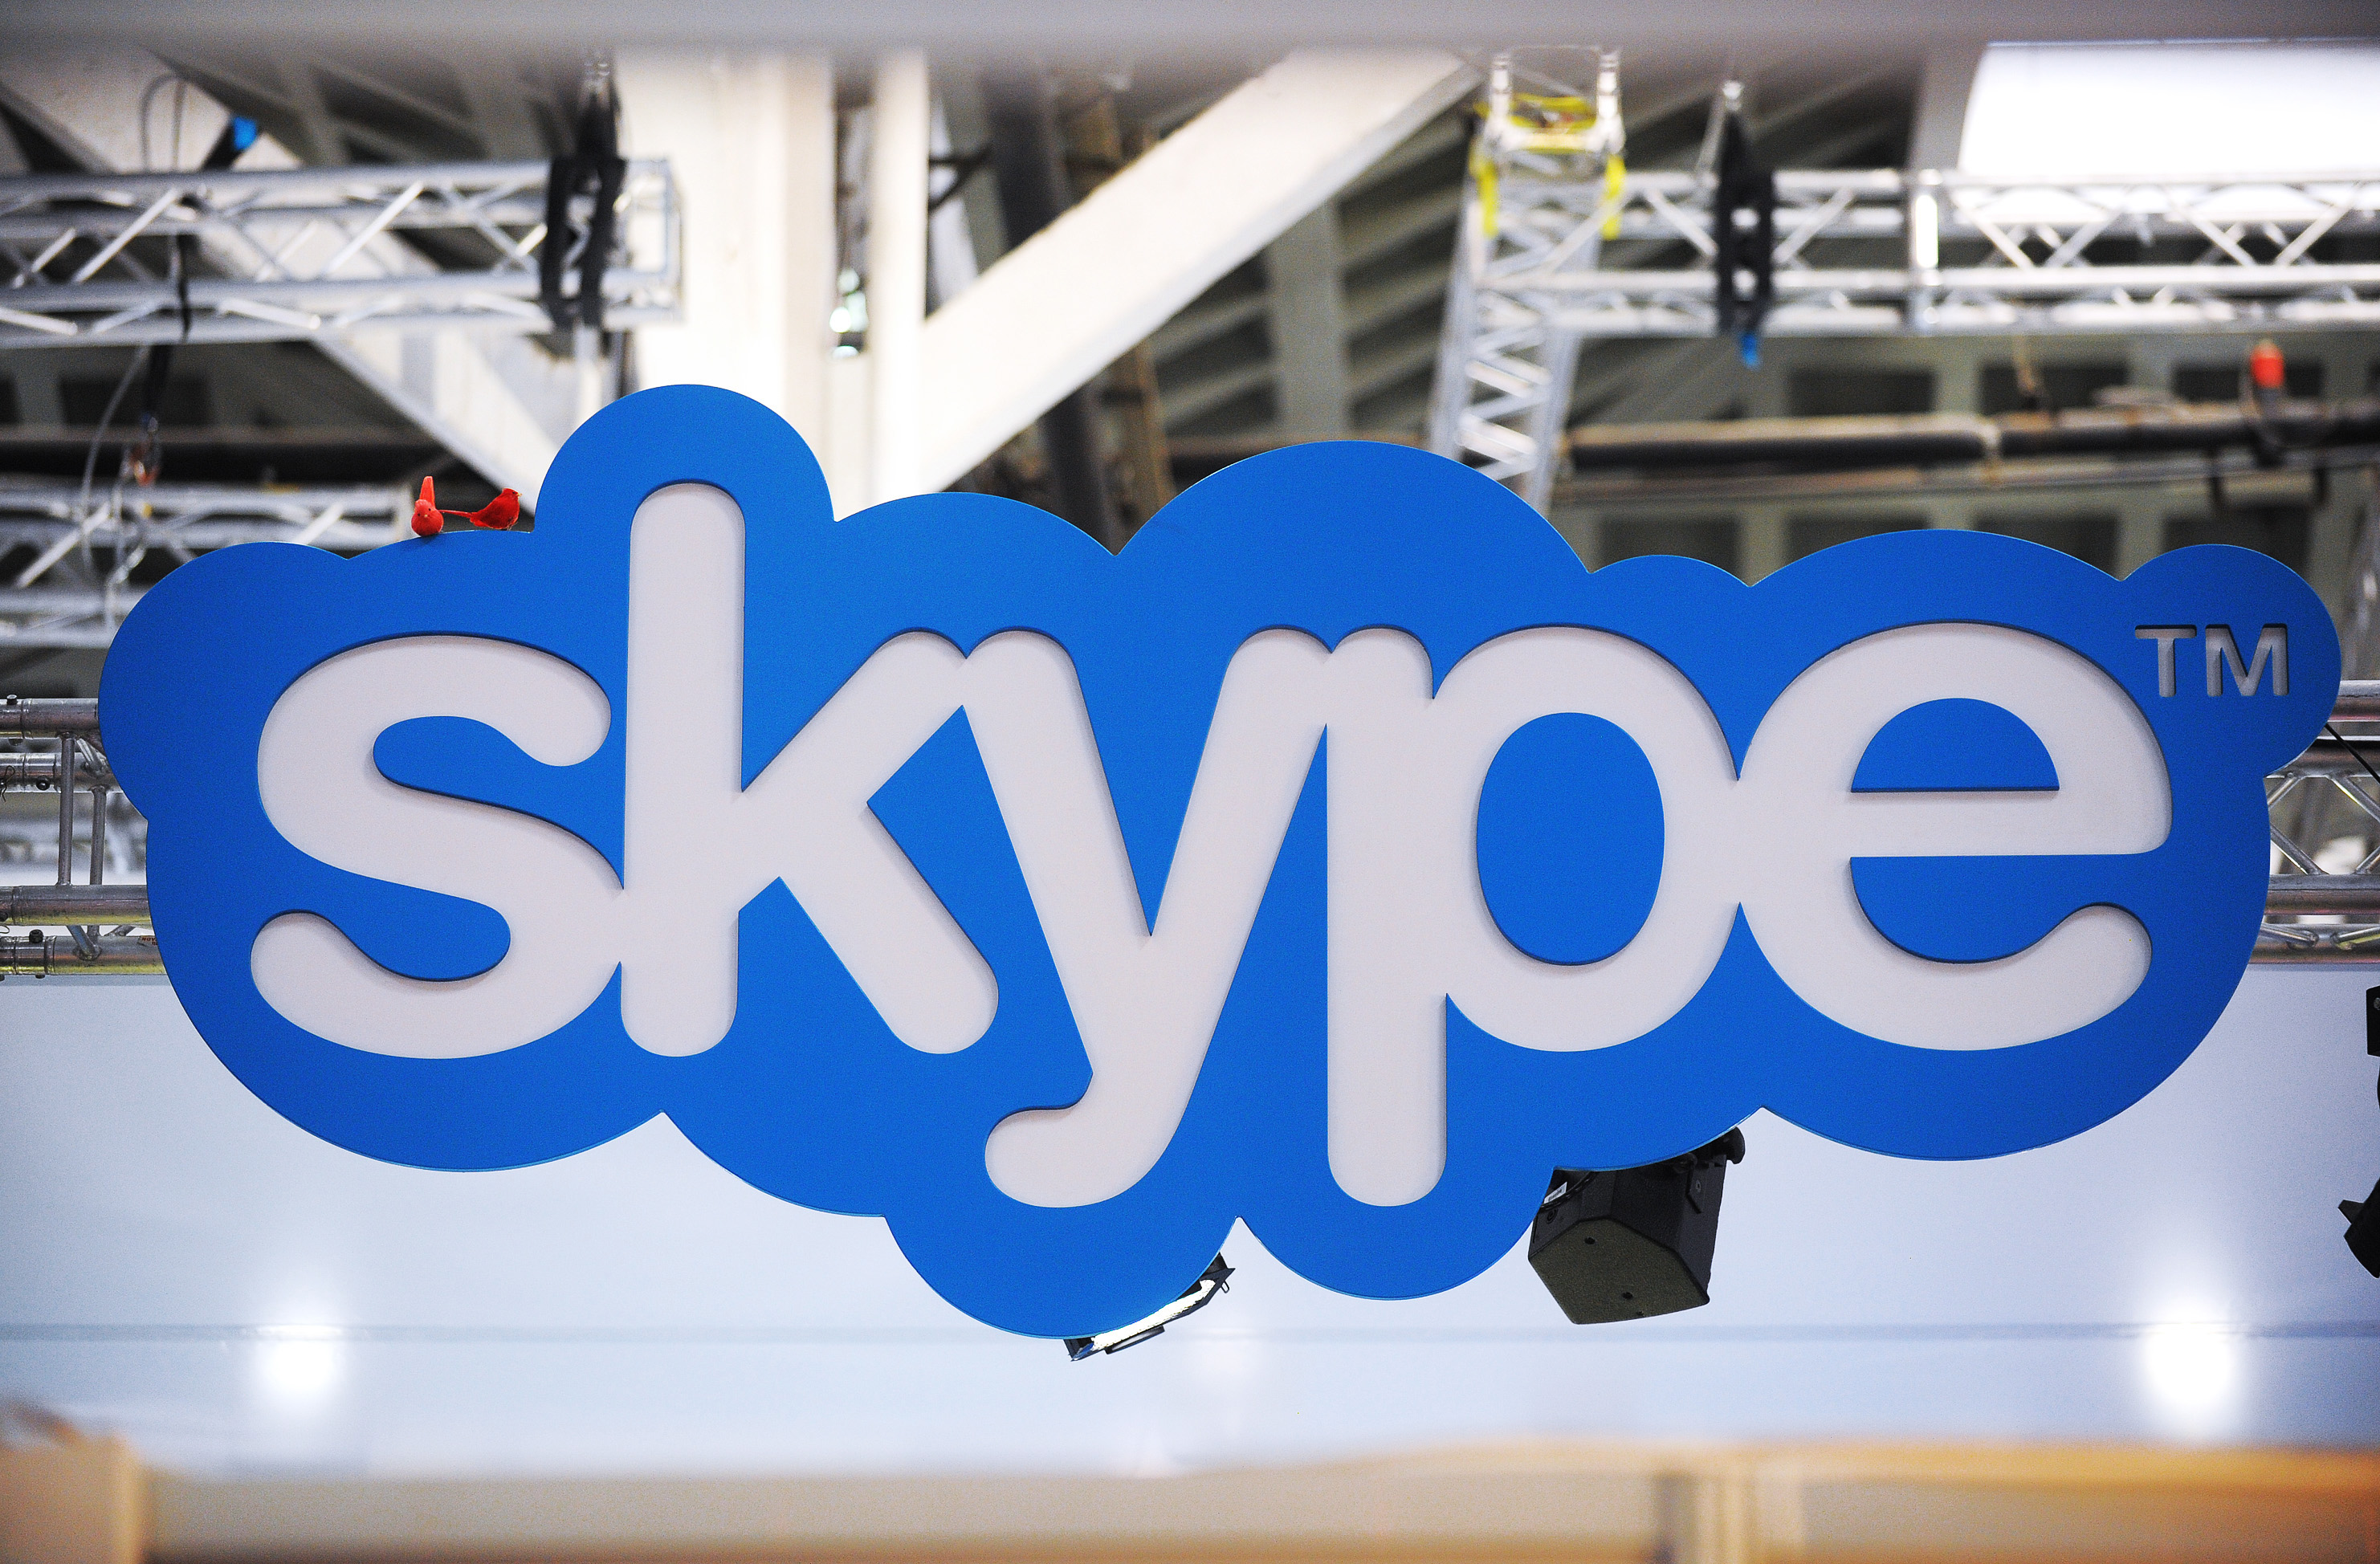 The Skype Technologies SA logo is seen above the trade stand at the Mobile World Congress in Barcelona, Spain, on Wednesday, Feb.16, 2011. (Bloomberg&mdash;Bloomberg via Getty Images)